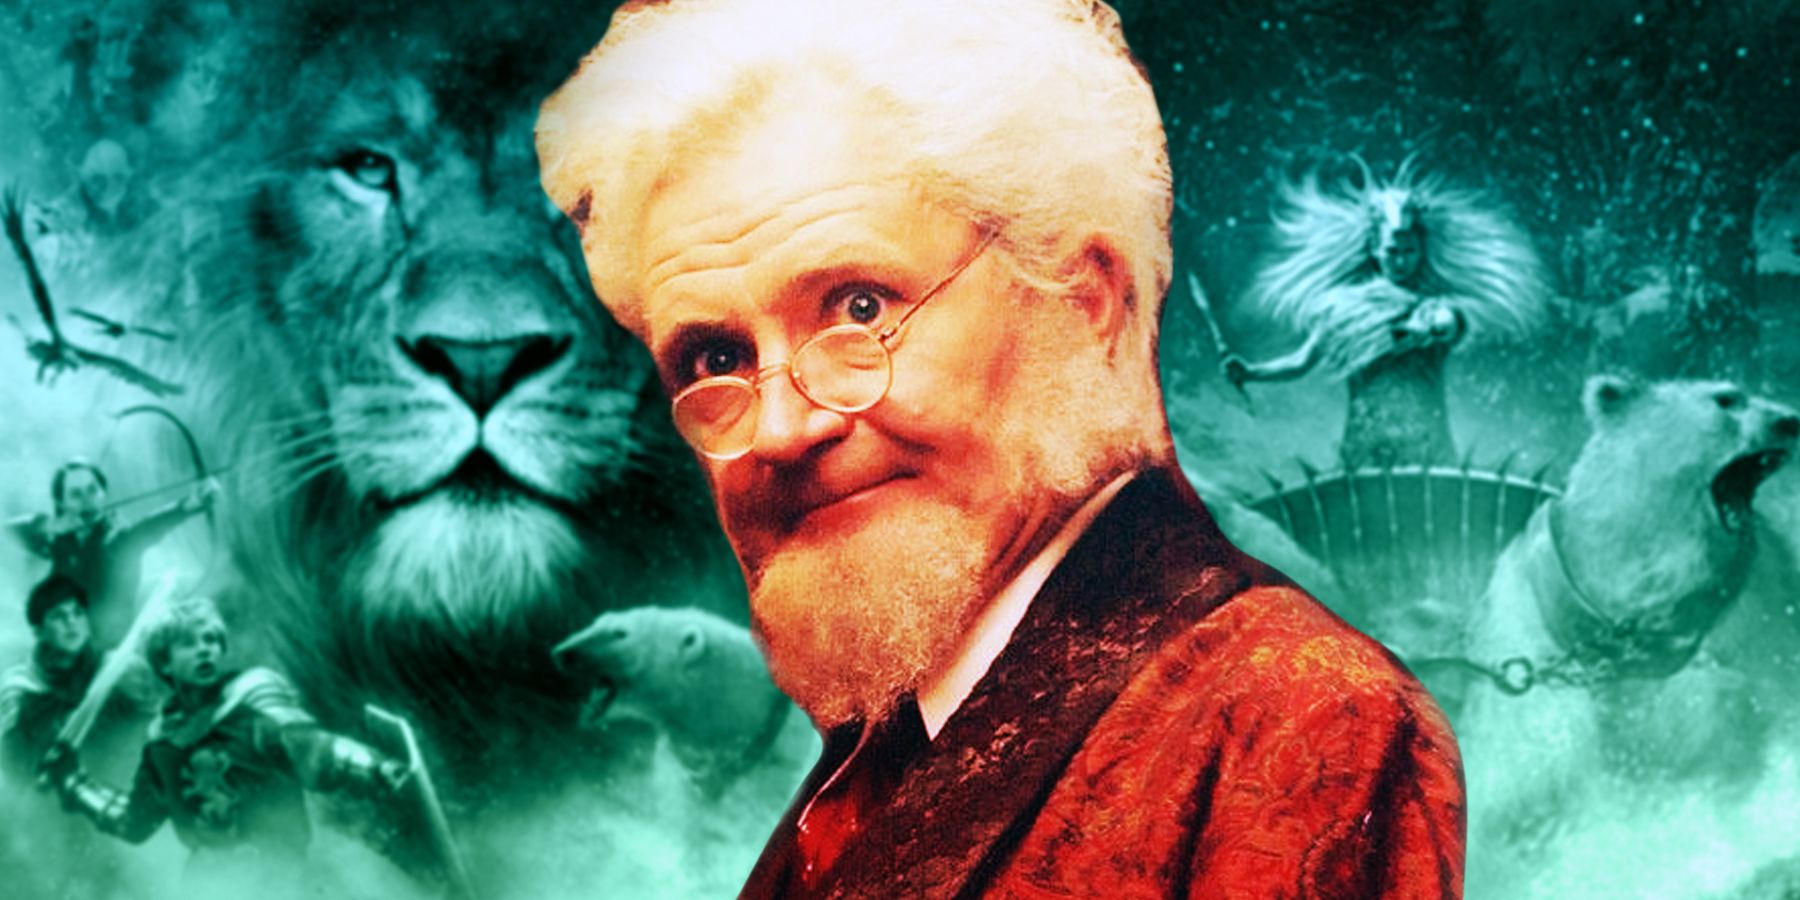 Professor Digory Kirke as seen in The Chornicles of Narnia: The Lion, the Witch, and the Wardrobe